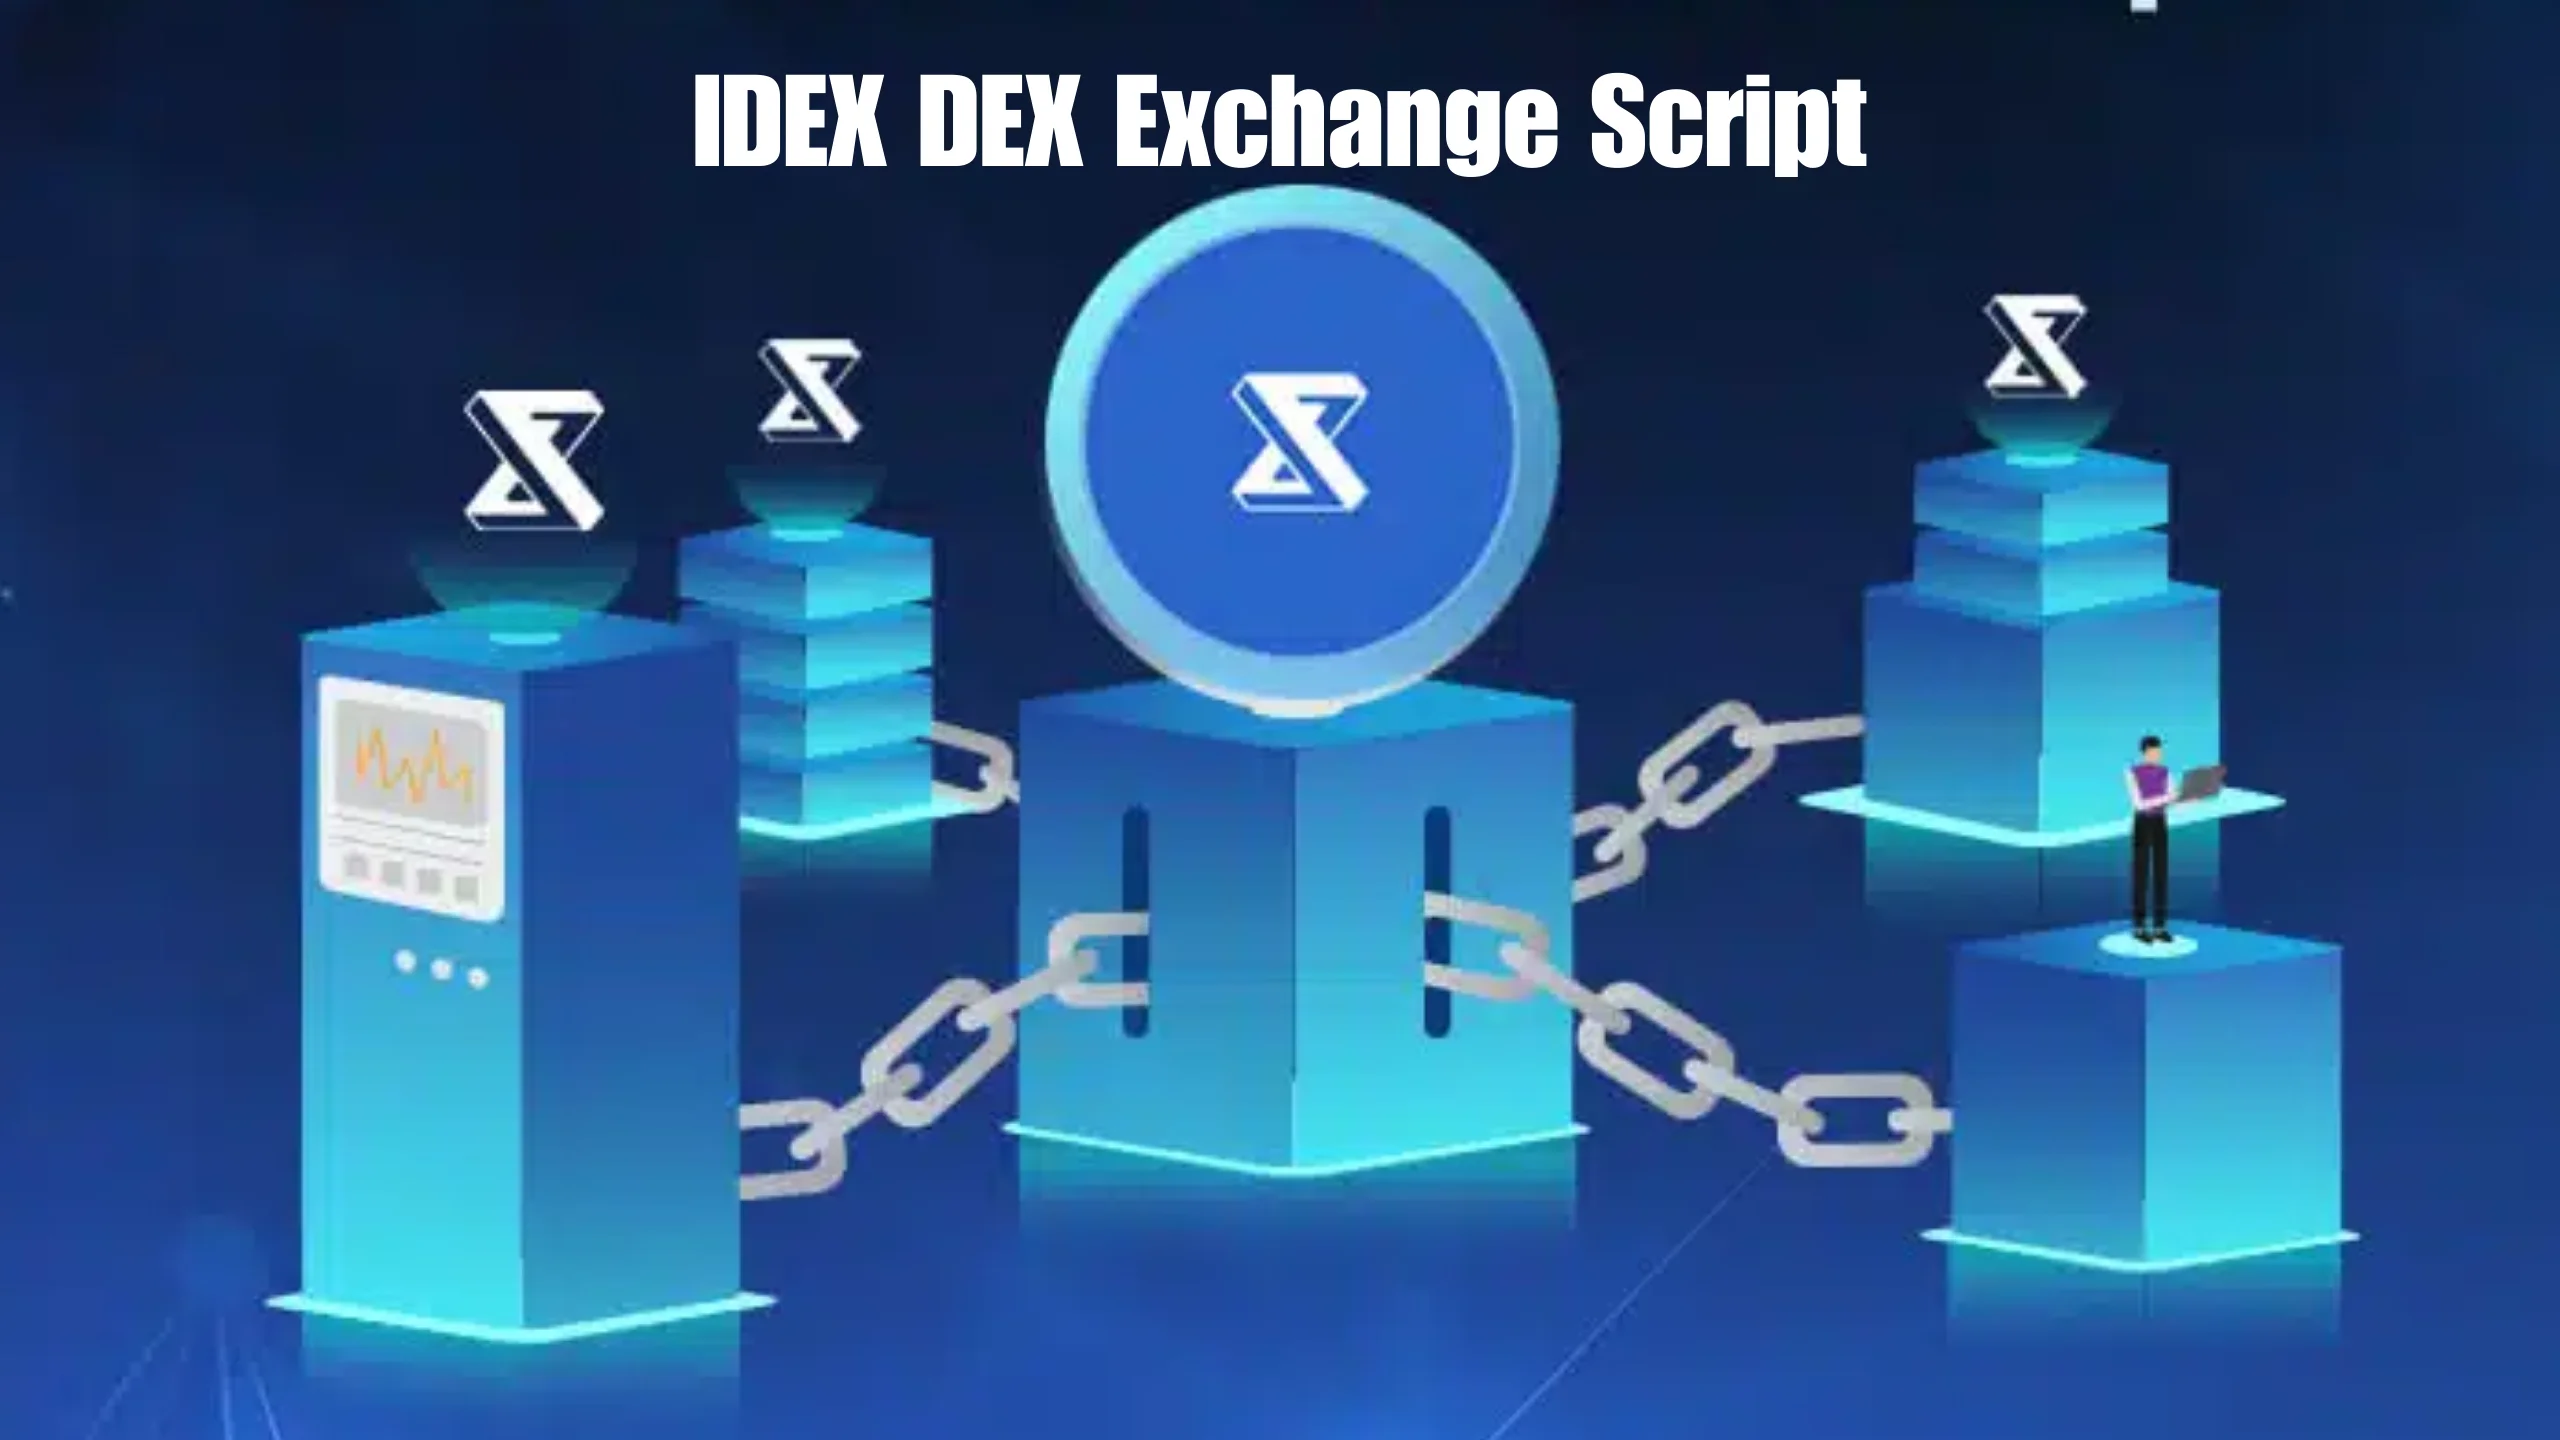 Screenshot of the IDEX DEX Exchange Script interface, displaying trading features and user dashboard.